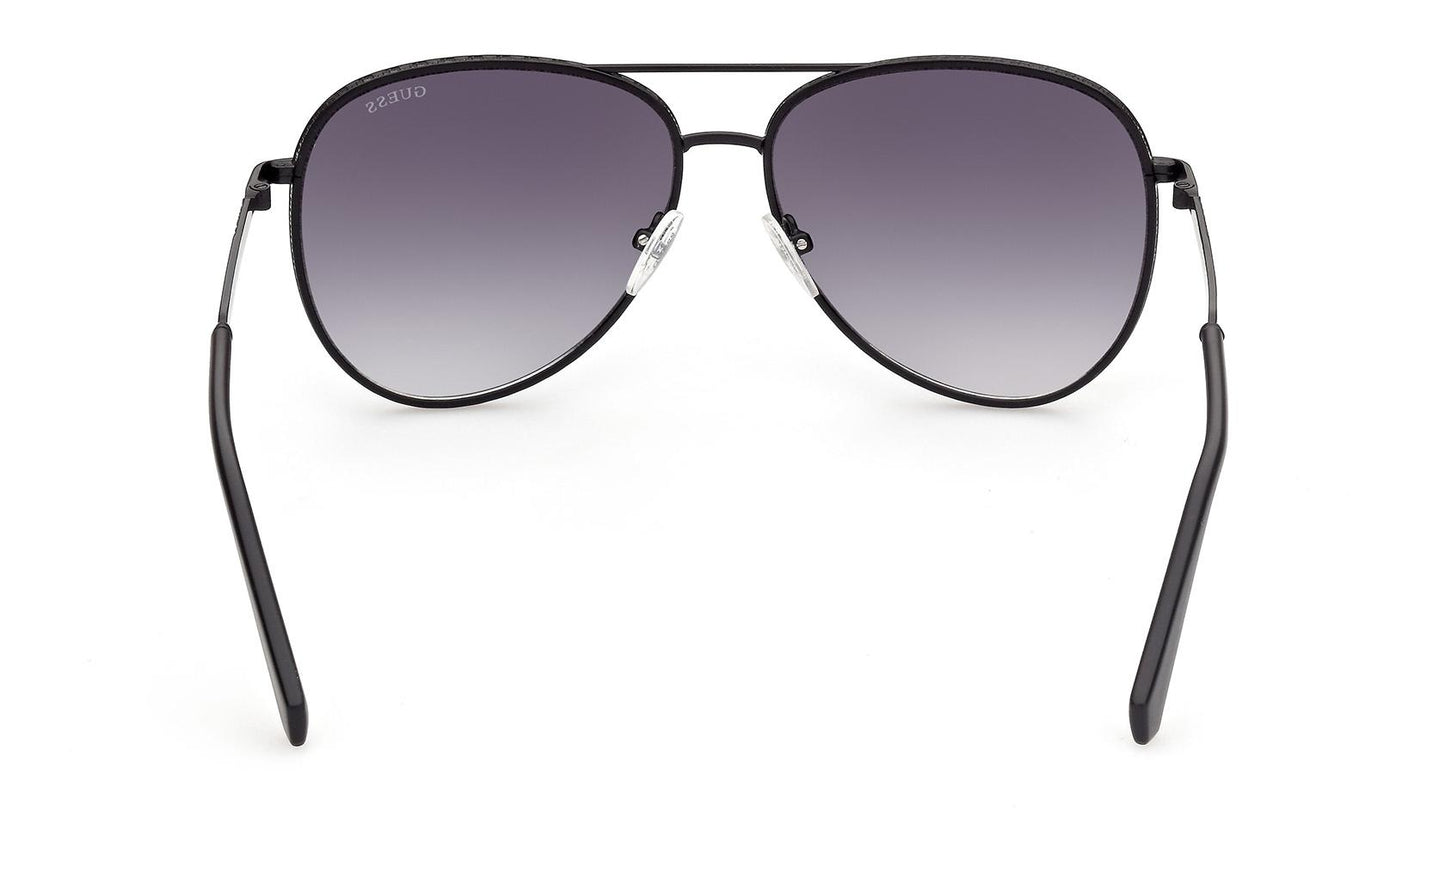 Load image into Gallery viewer, Guess Sunglasses GU5206 02B
